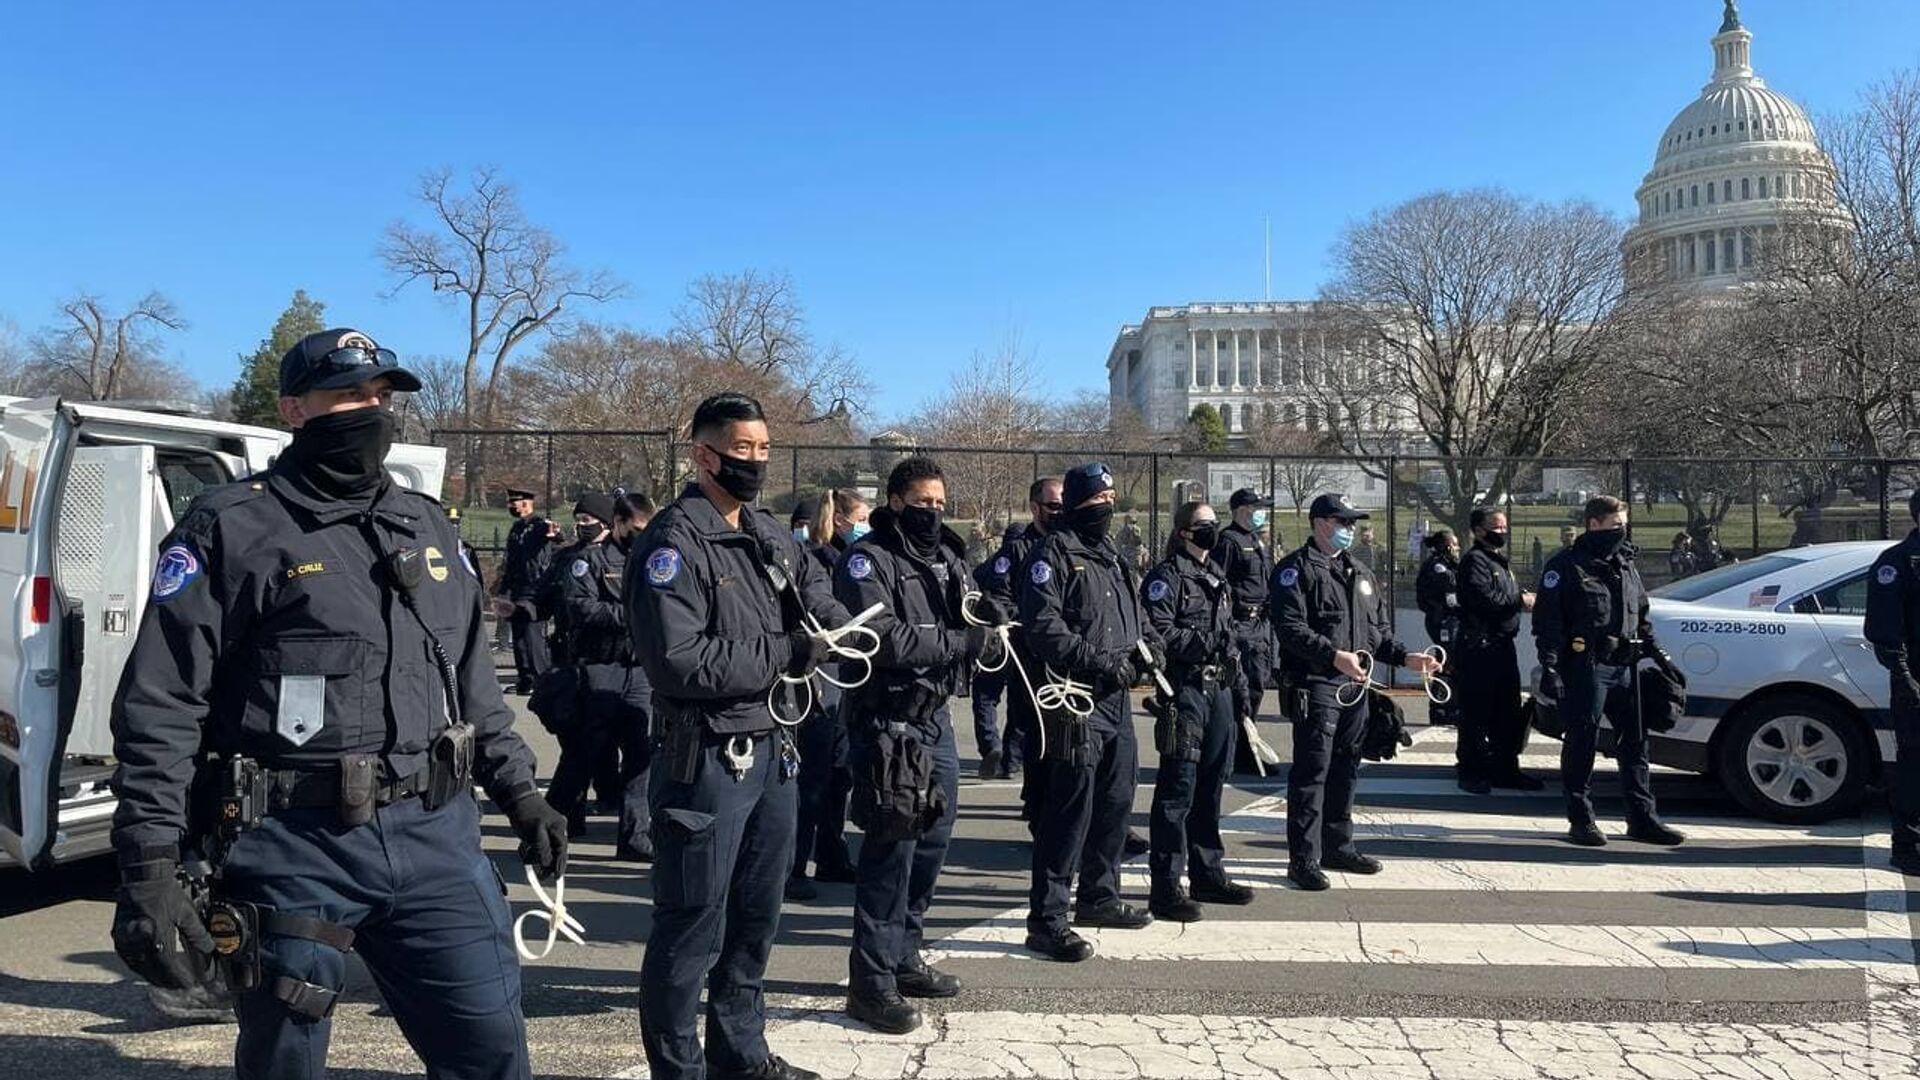 Police officers stand on guard outside US Capitol building as House of Representatives votes to impeach Trump - Sputnik International, 1920, 22.05.2021